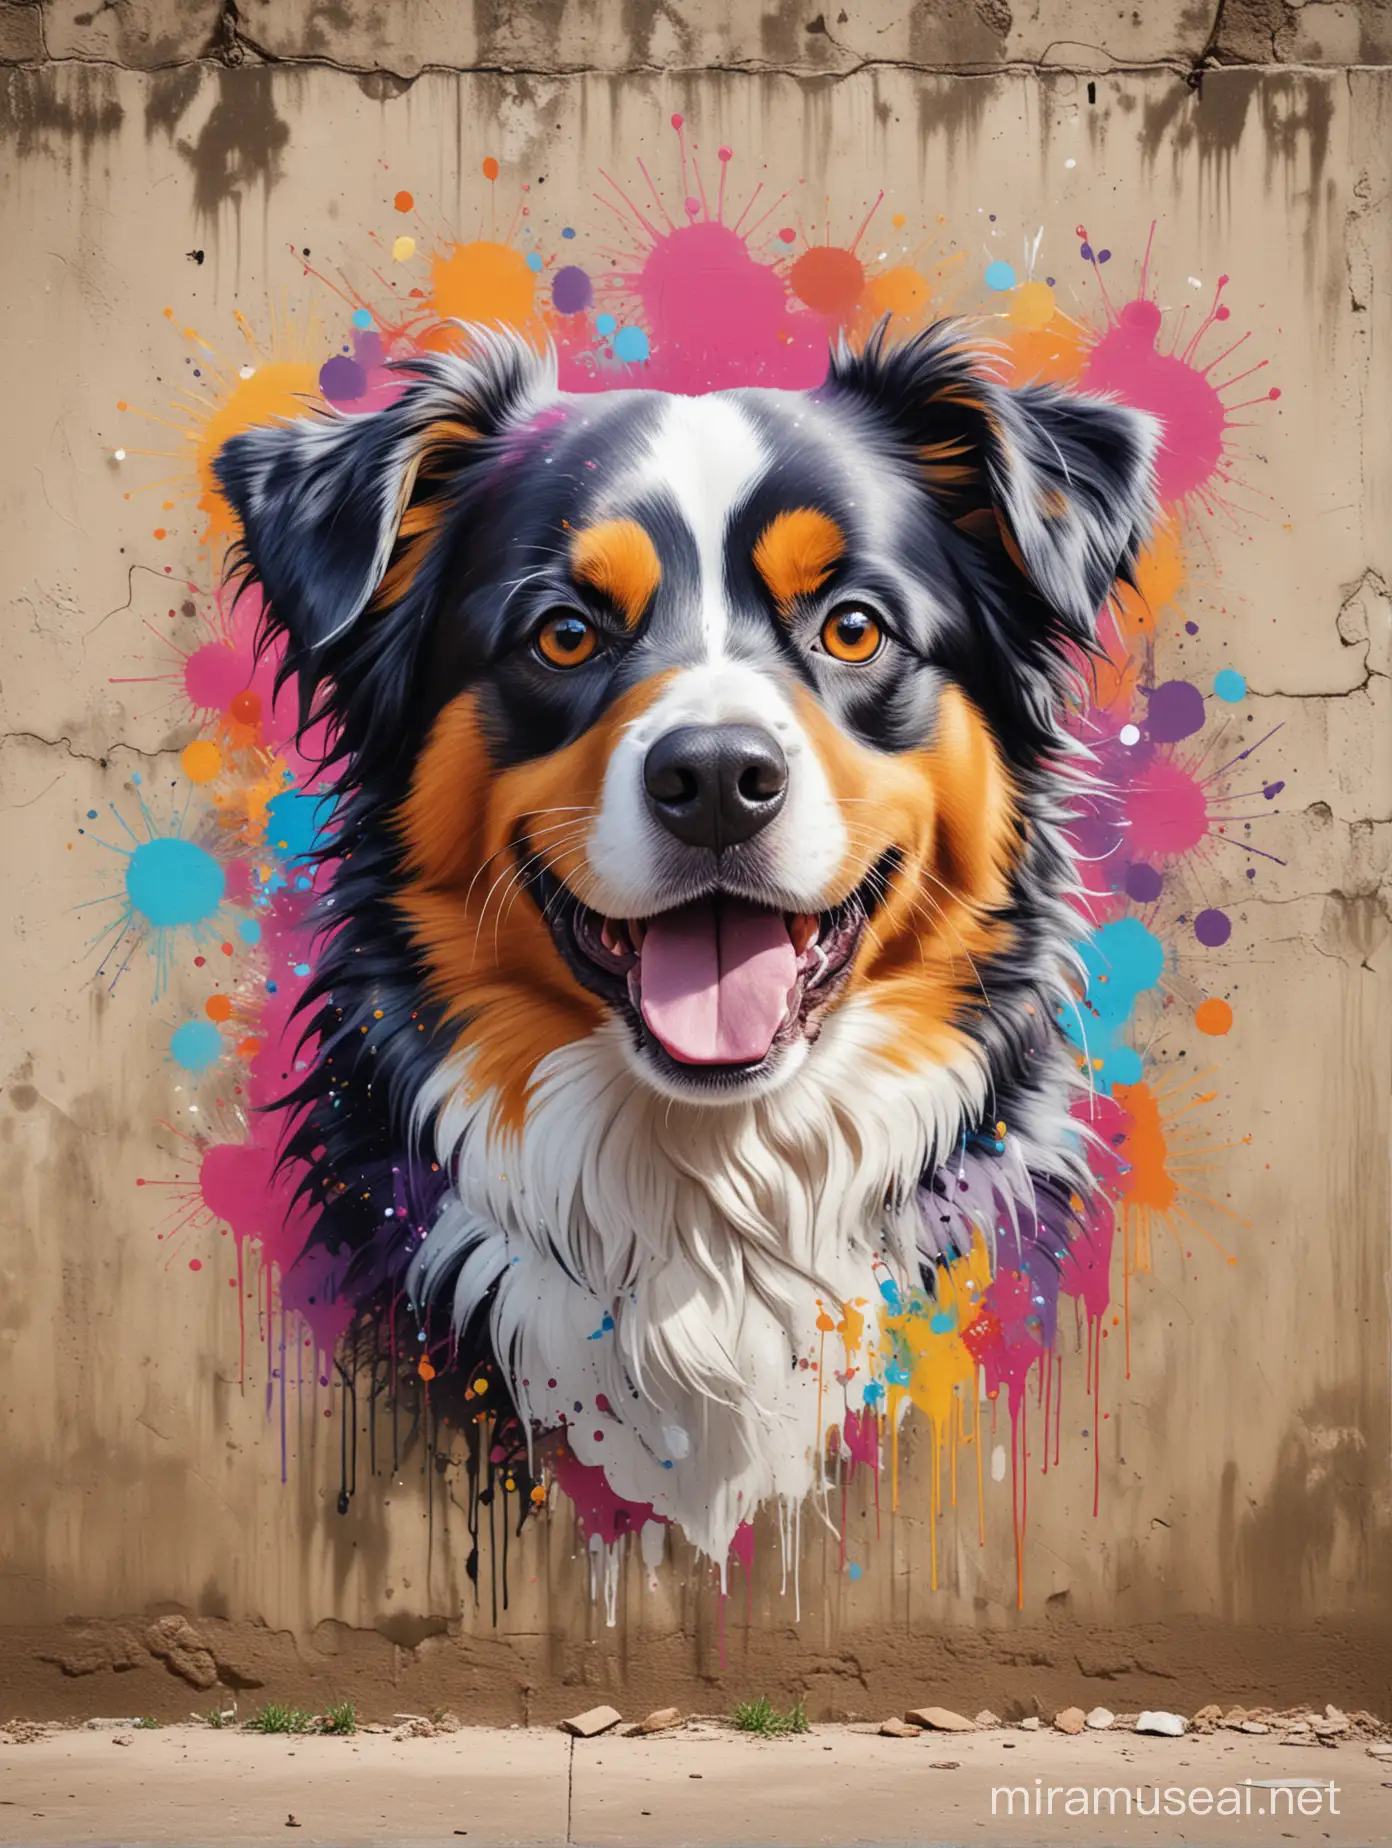 art movement focused on emotional impact through free-flowing shapes and colors, often without depicting real objects,
Create a graffiti of a tiny happy face Australian Shepherd Dog on the foreground, colorful graffiti art, on a wall, rustic background, graffiti art style